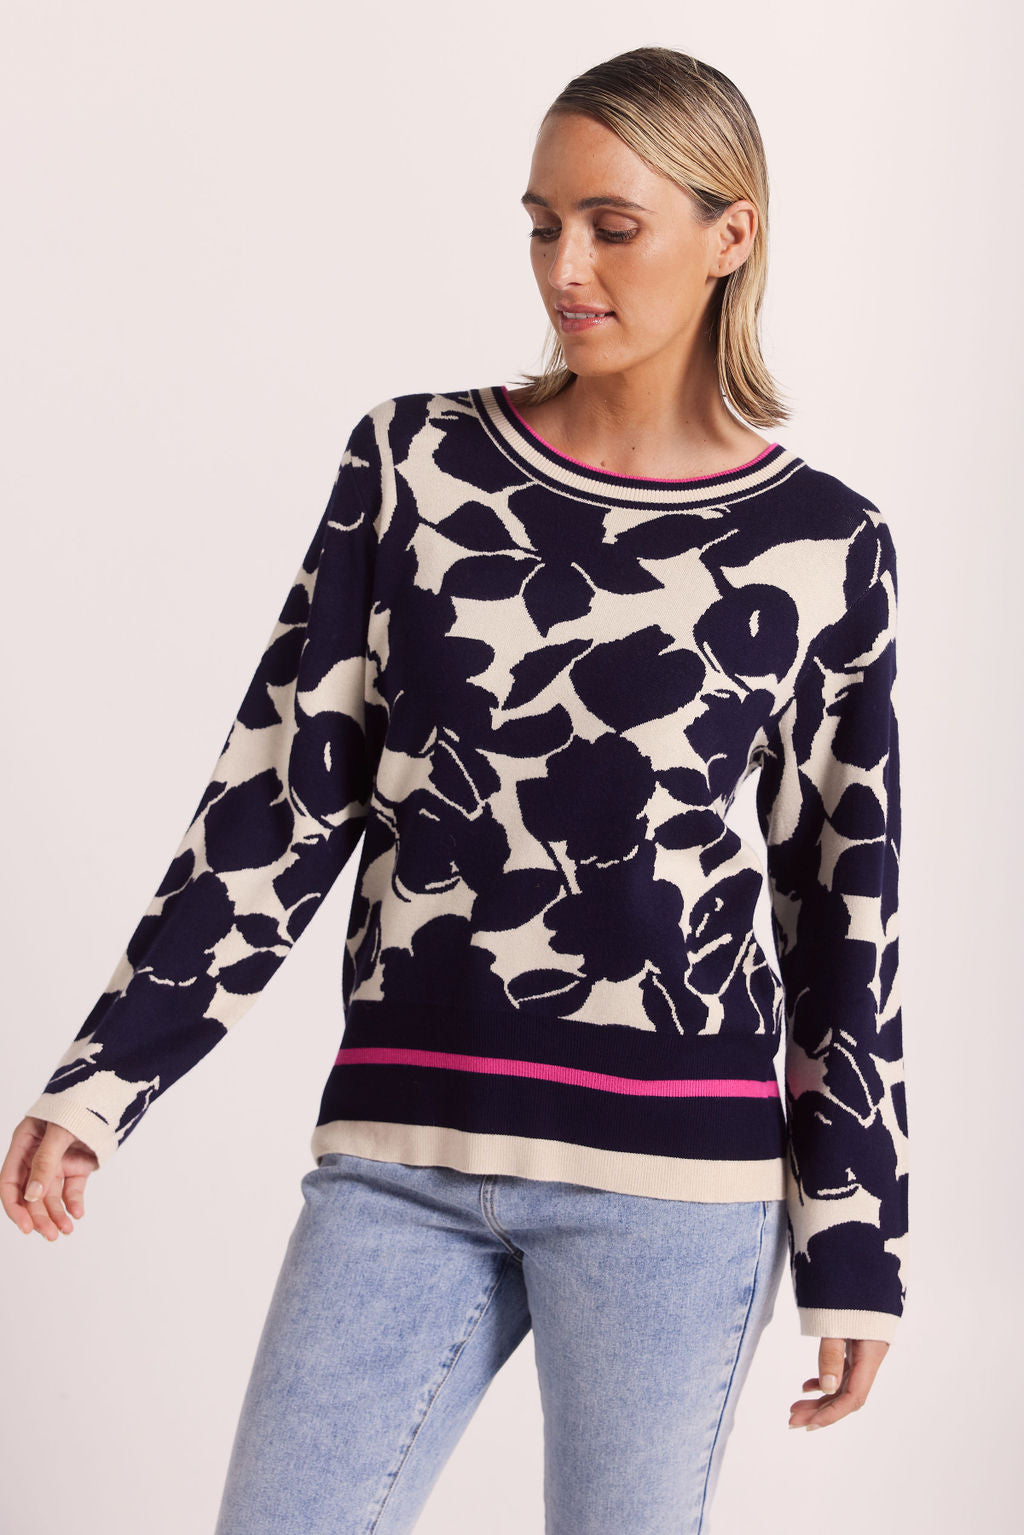 Wear Colour Floral Bomb Sweater - Navy/Fuchsia